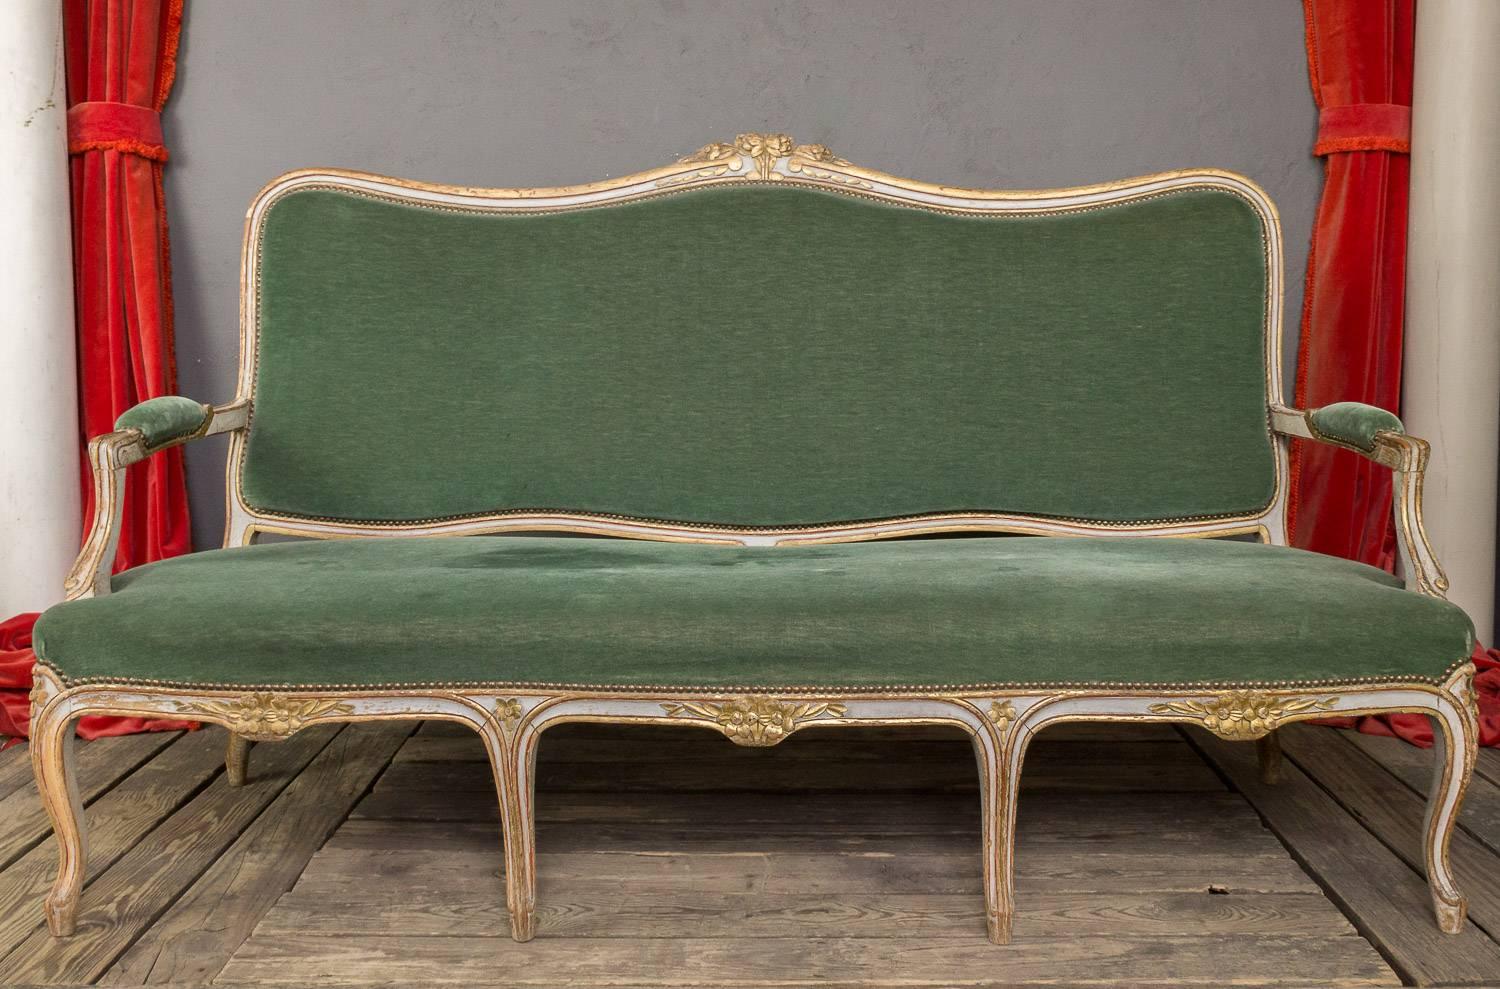 Large late 19th century settee upholstered in a pale green velvet. The frame shows traces of rich gilding. Large seat and high back.

